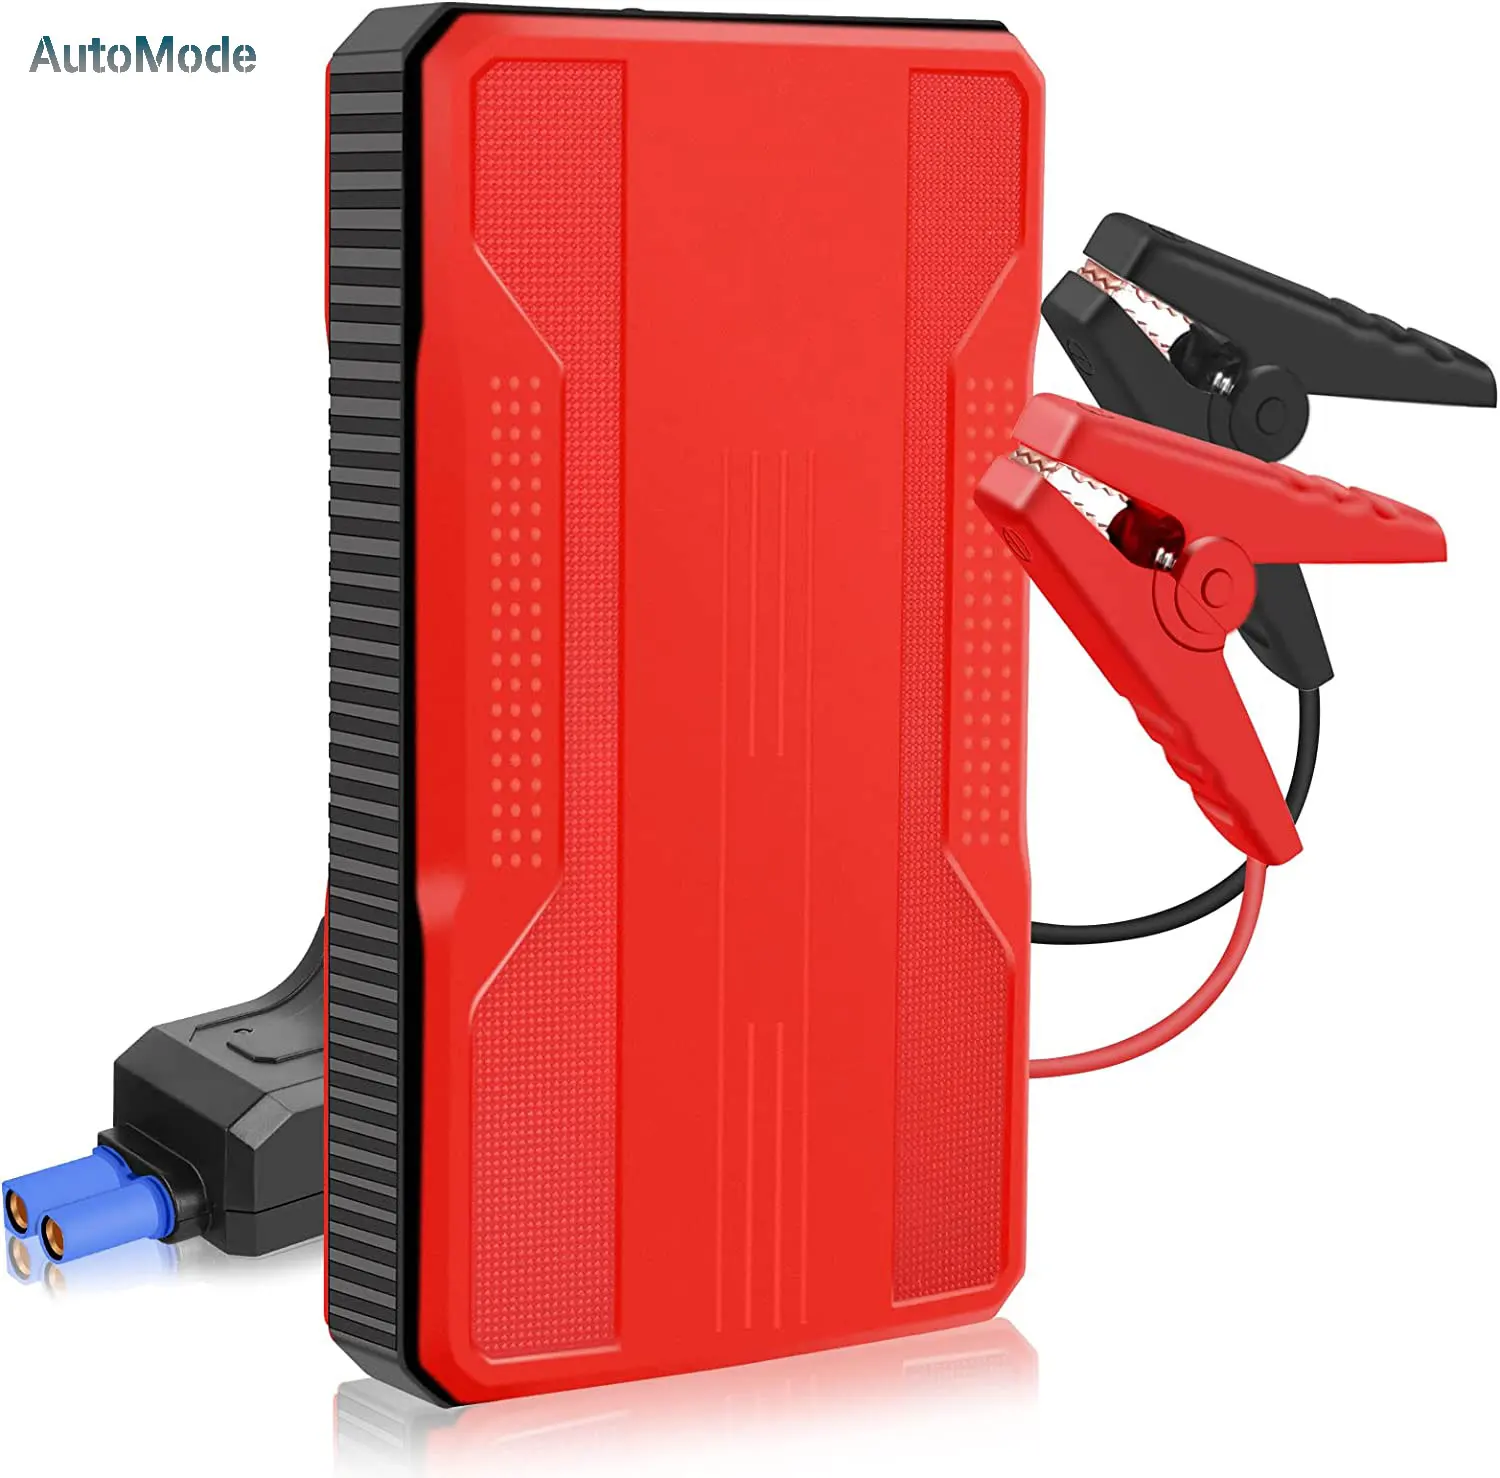 

20000mAh Car Jump Starter 400A 12V Output Portable Emergency Start-up Charger for Cars Booster Battery Starting Device